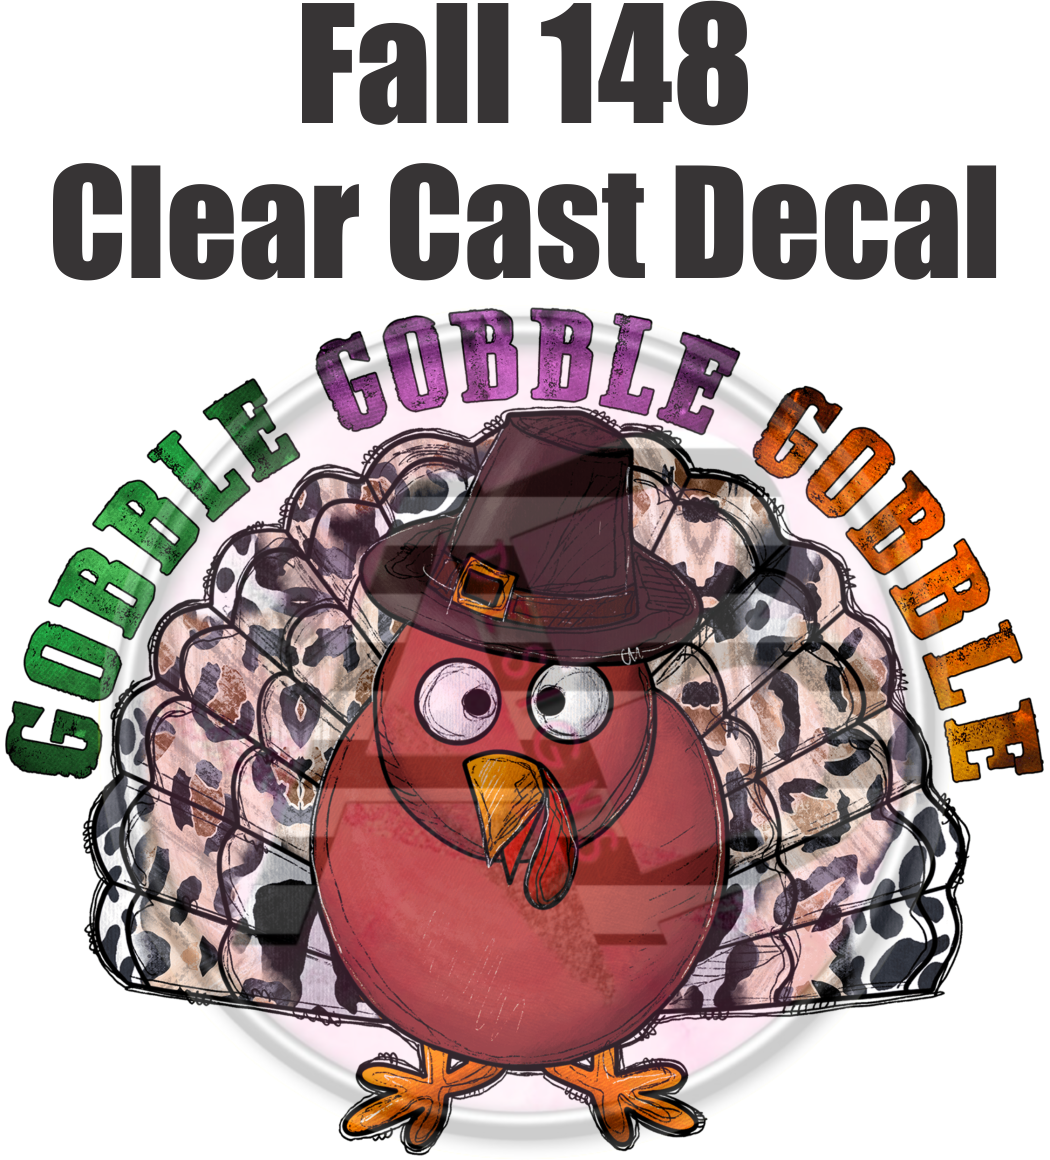 Fall 148 - Clear Cast Decal